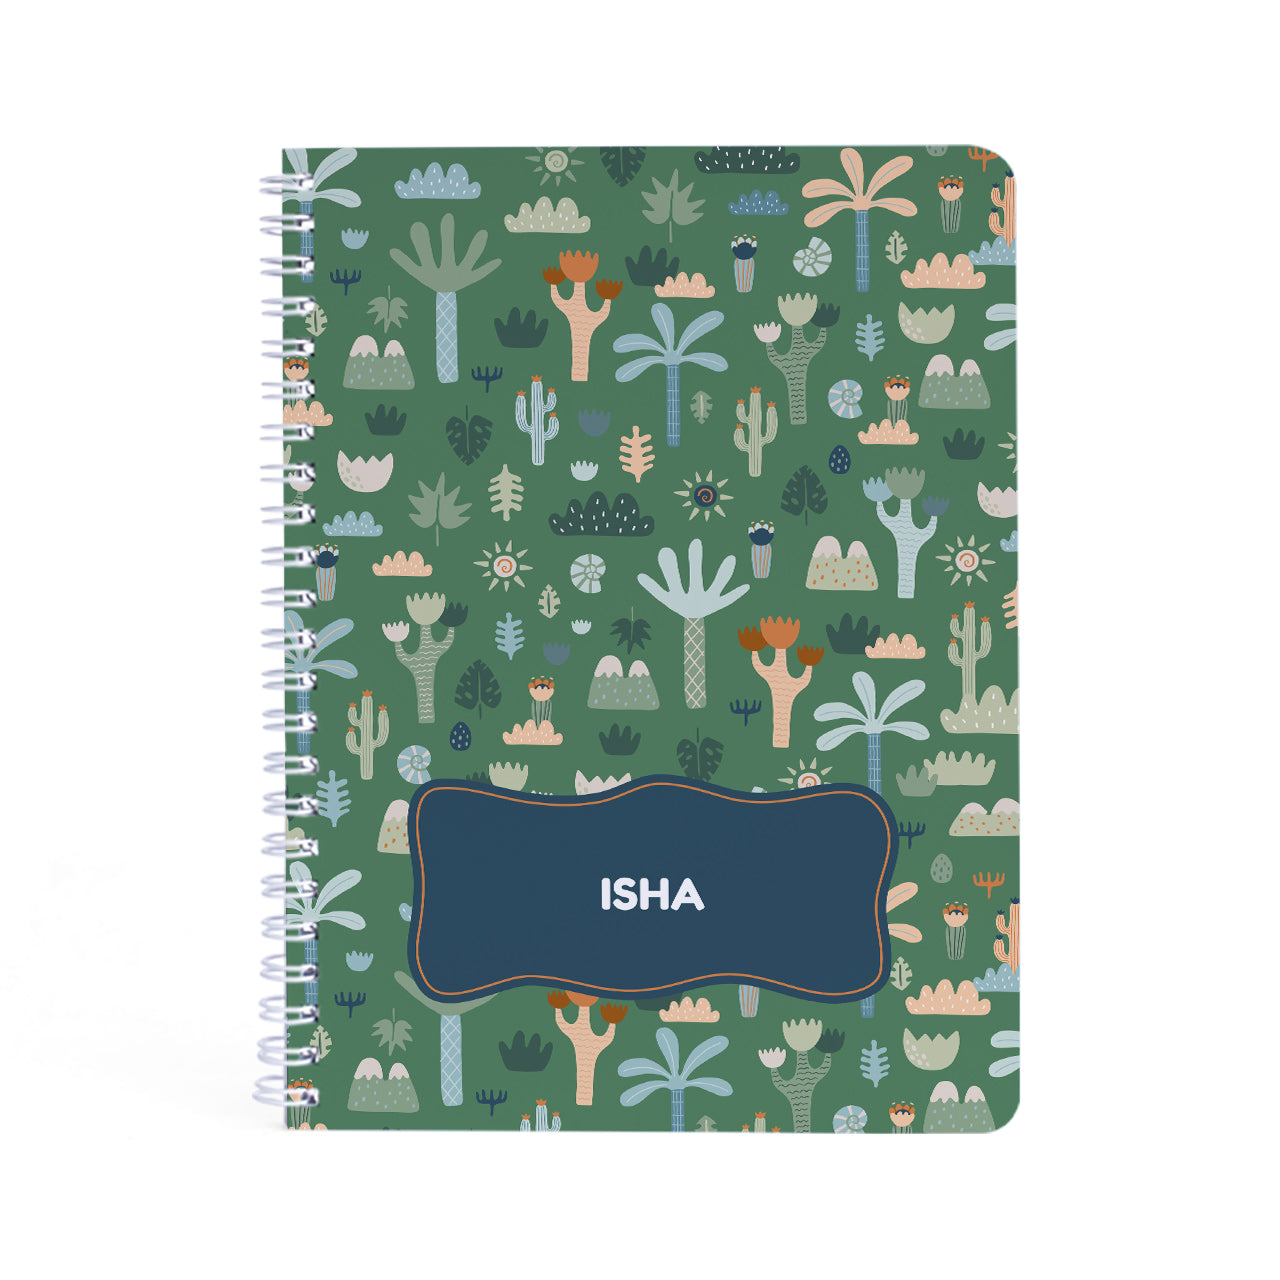 Personalised Spiral Notebook - Nature and I